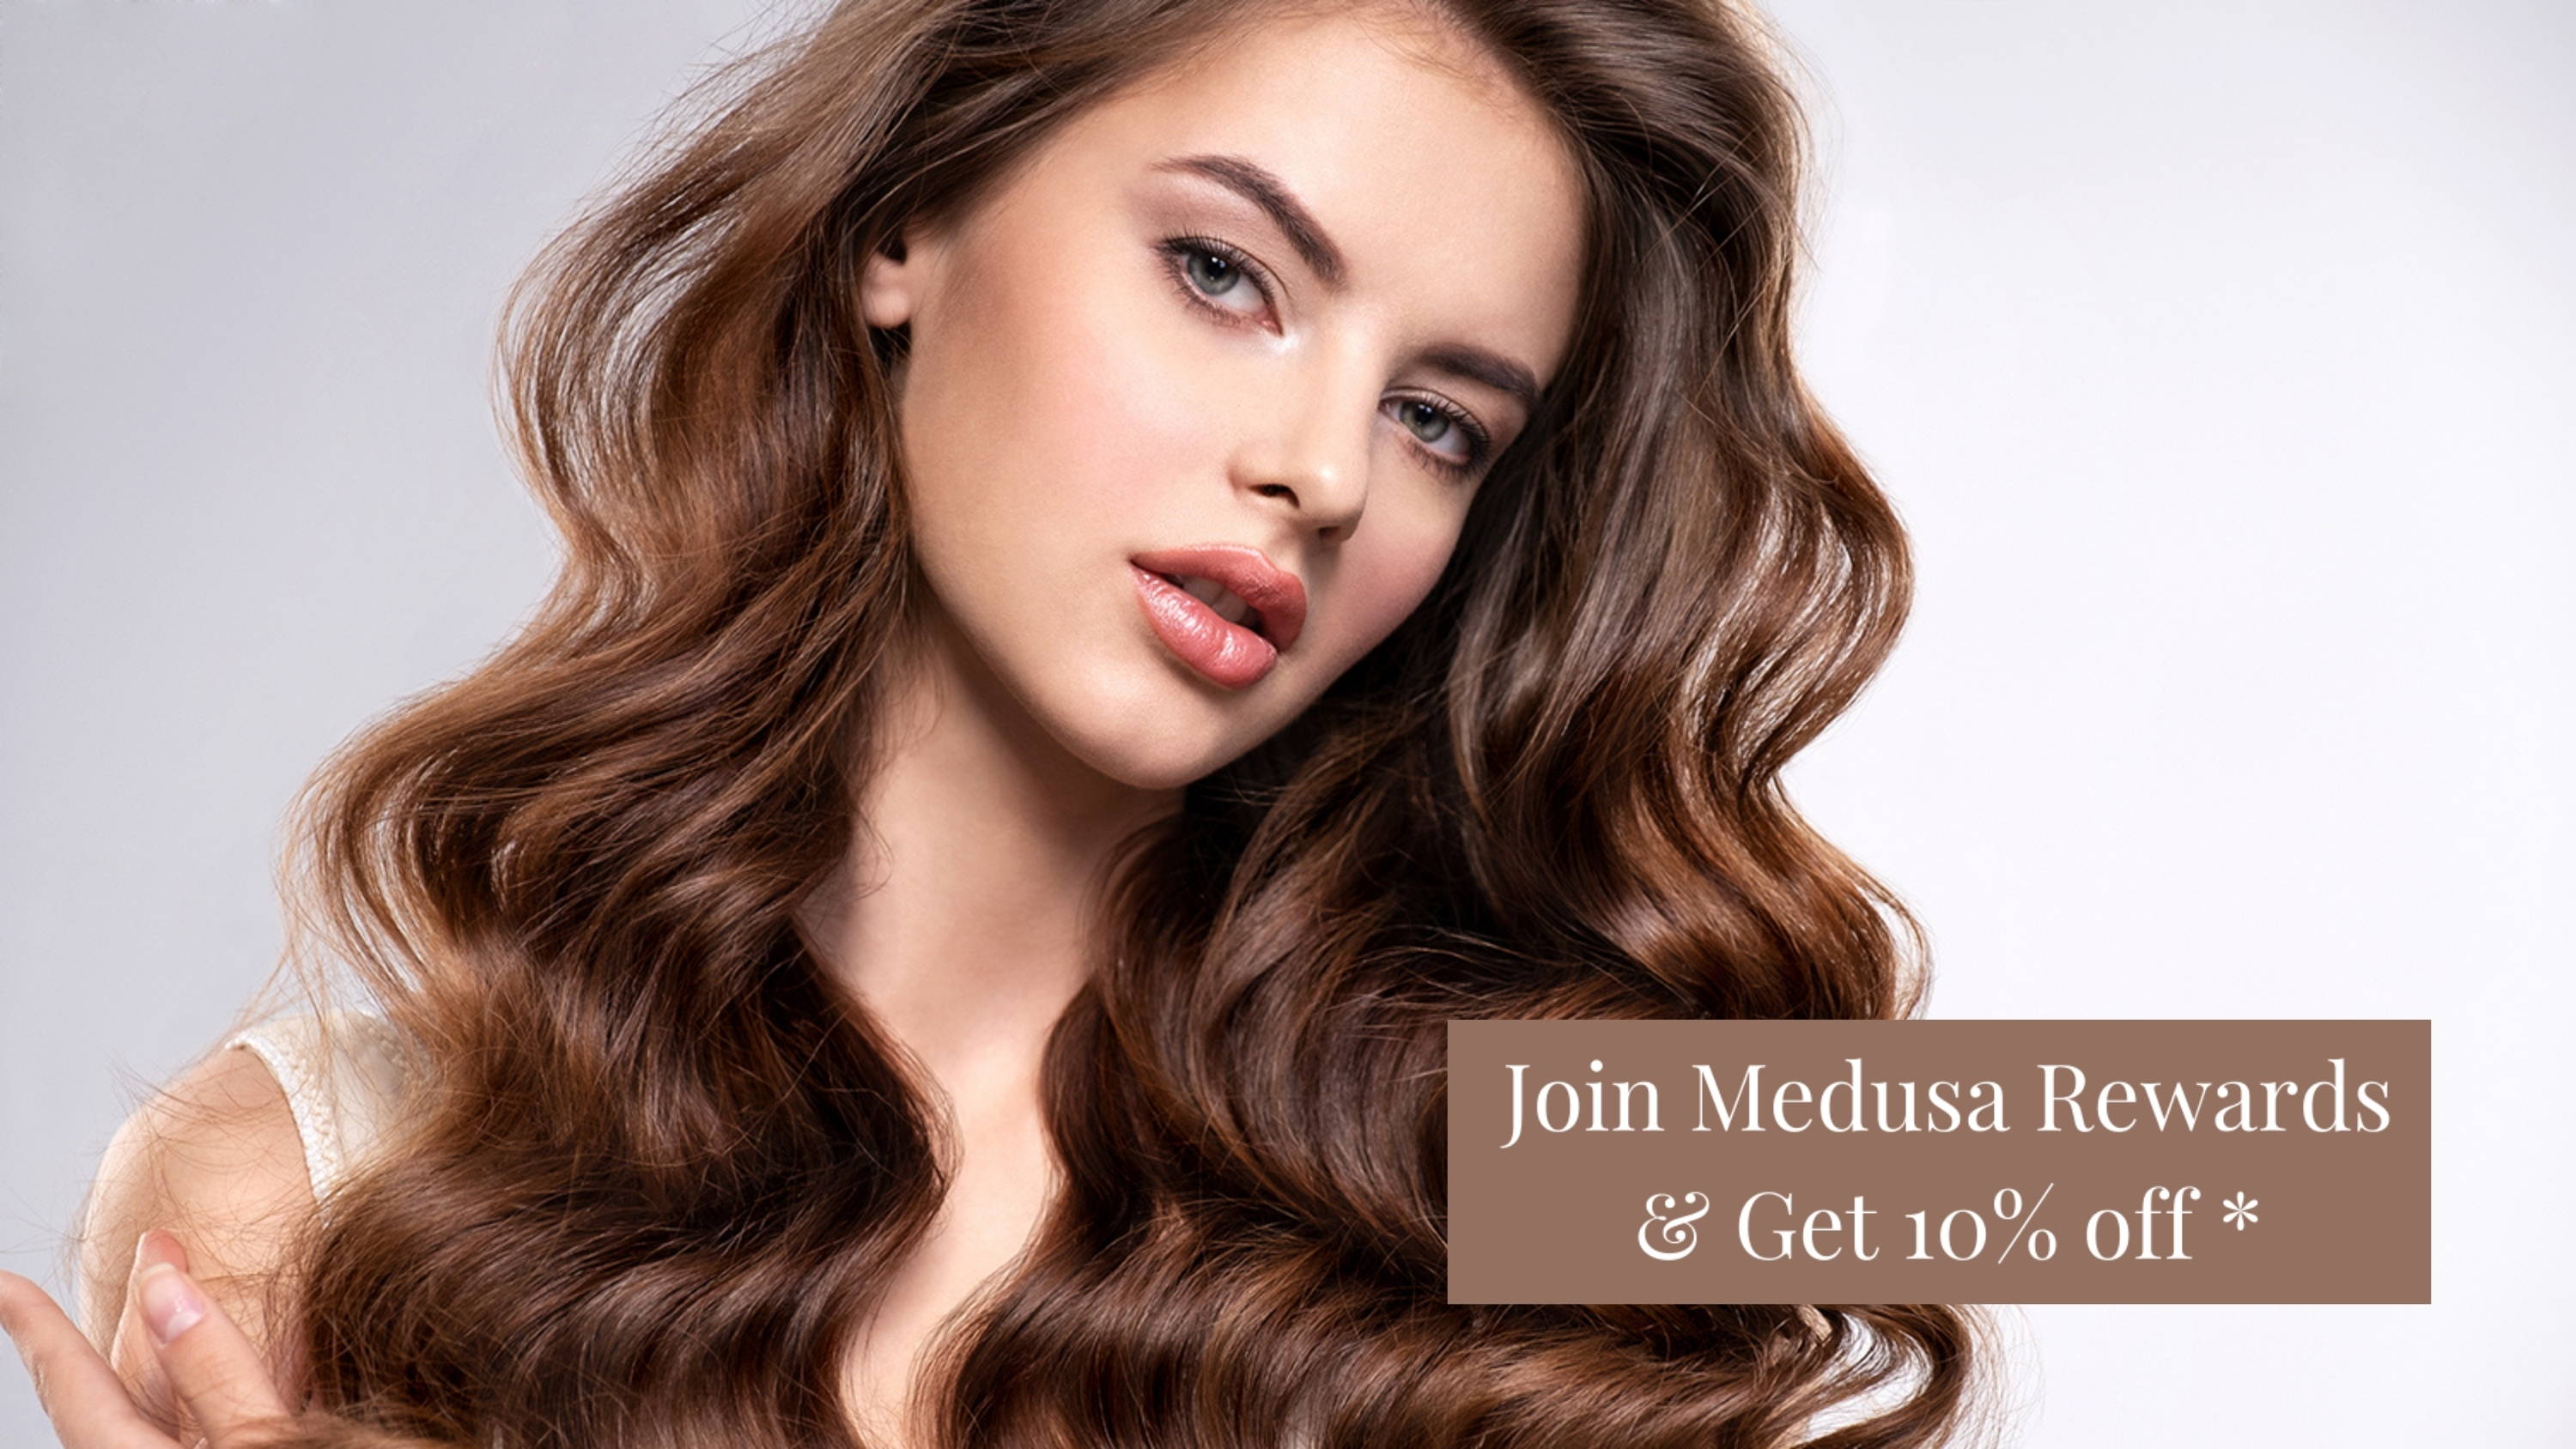 Sign that says Join Medusa Rewards and Get 10% off is positioned over an image of a young woman wearing wavy brown Medusa hair extensions 